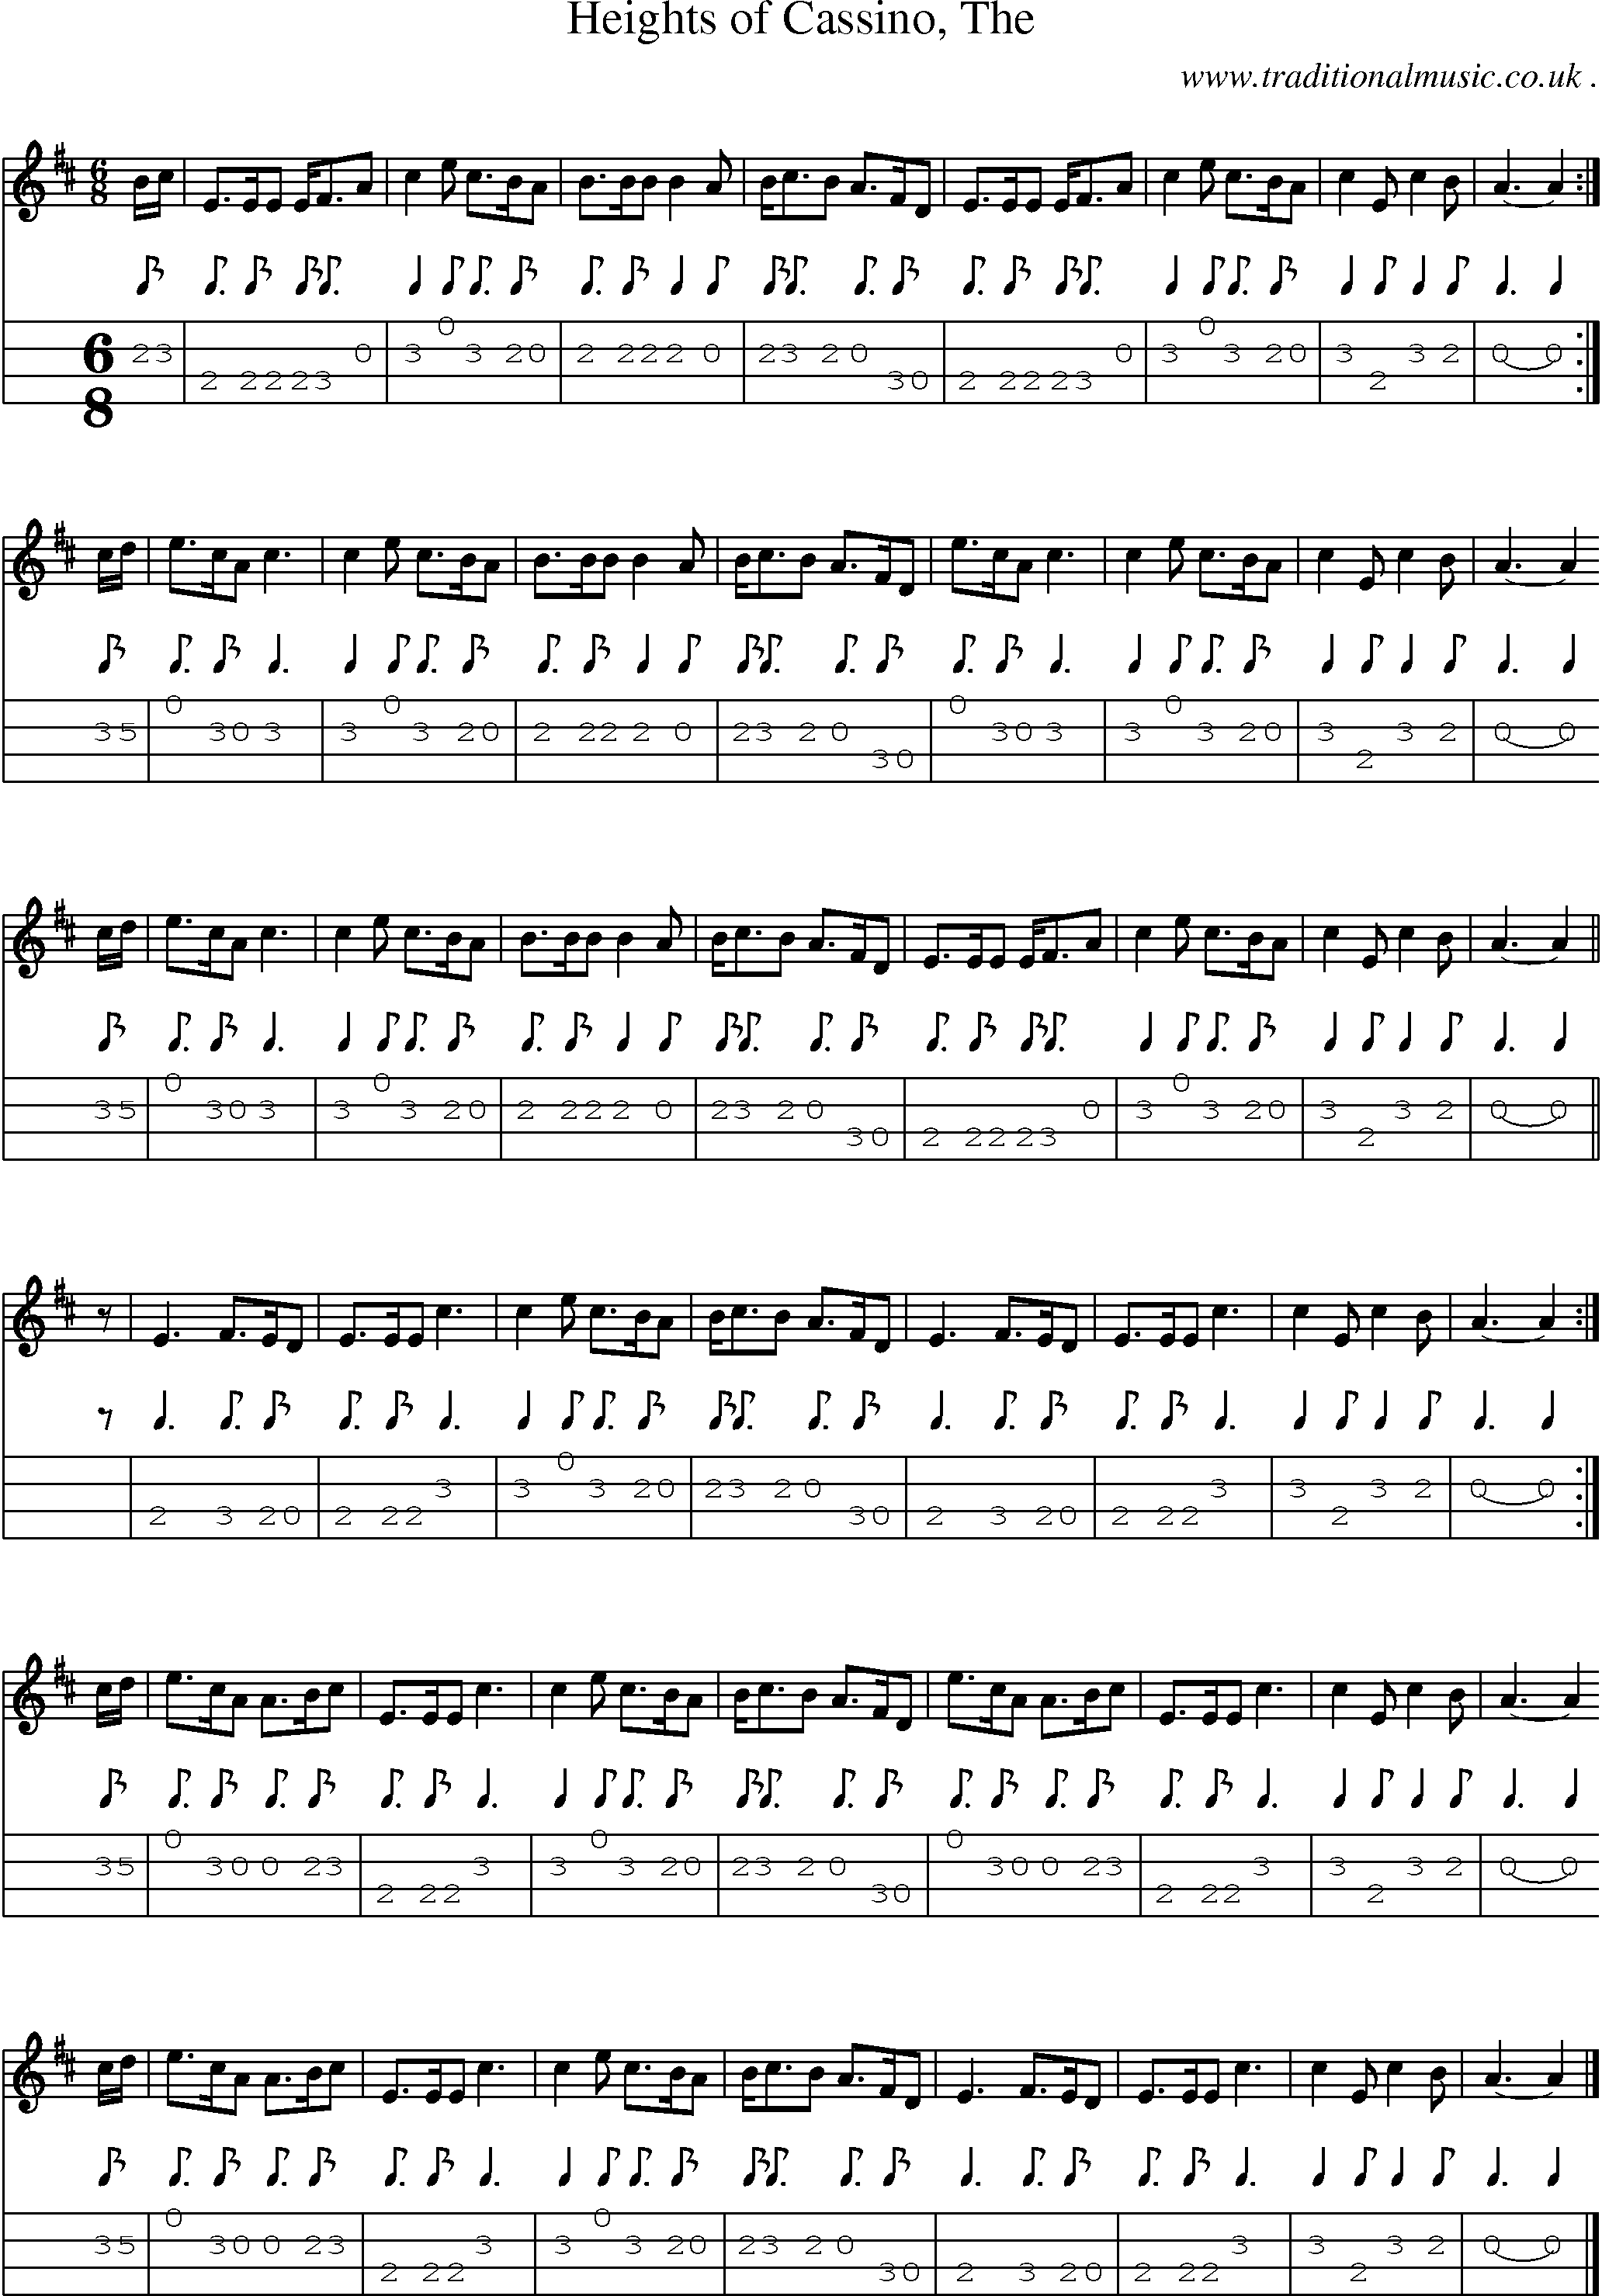 Sheet-music  score, Chords and Mandolin Tabs for Heights Of Cassino The